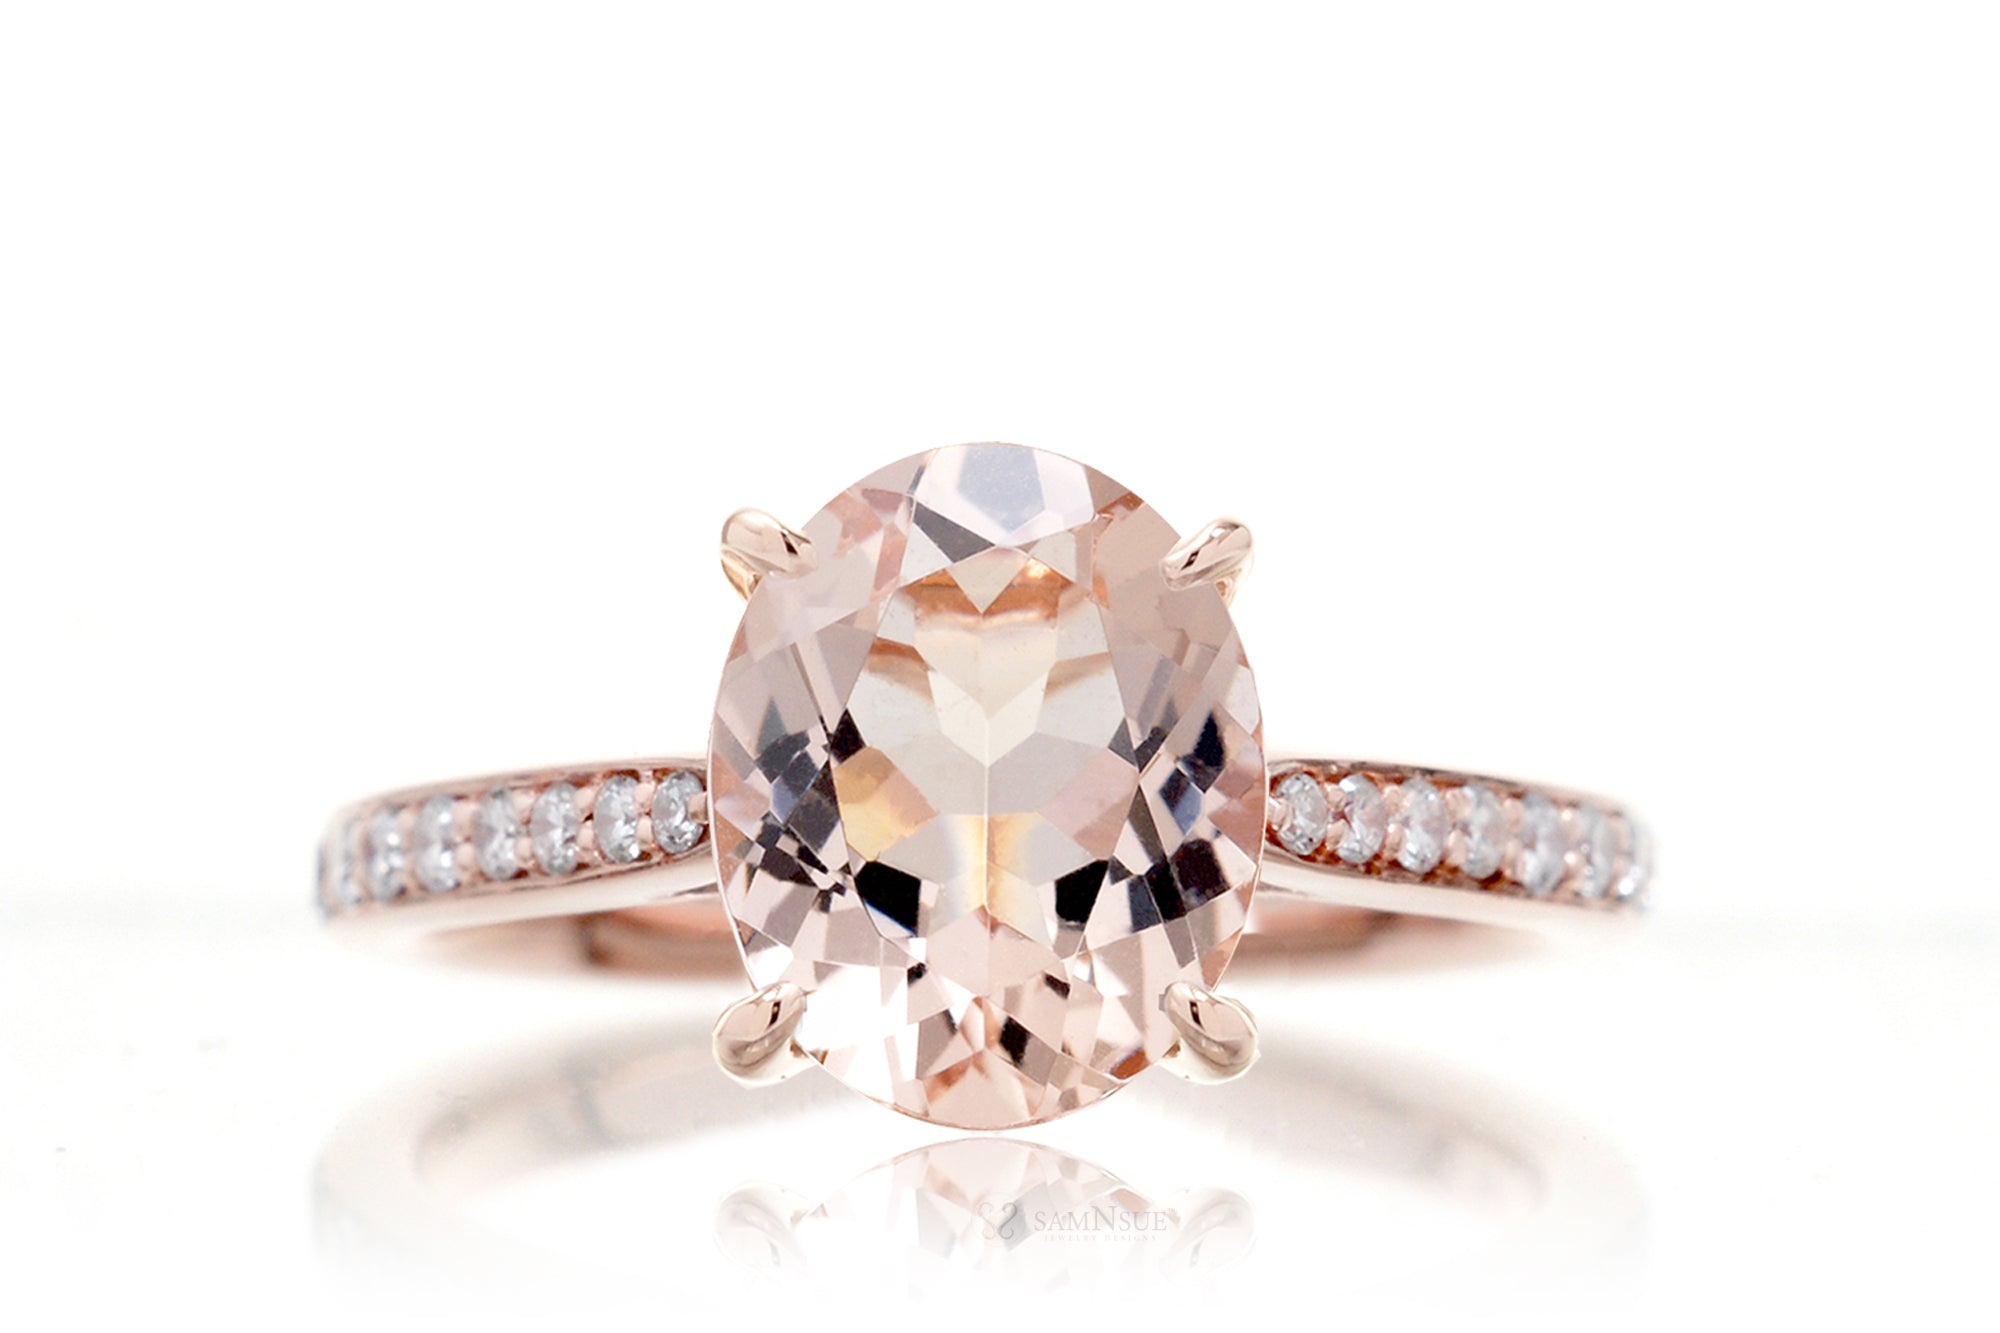 The Emily Oval Morganite